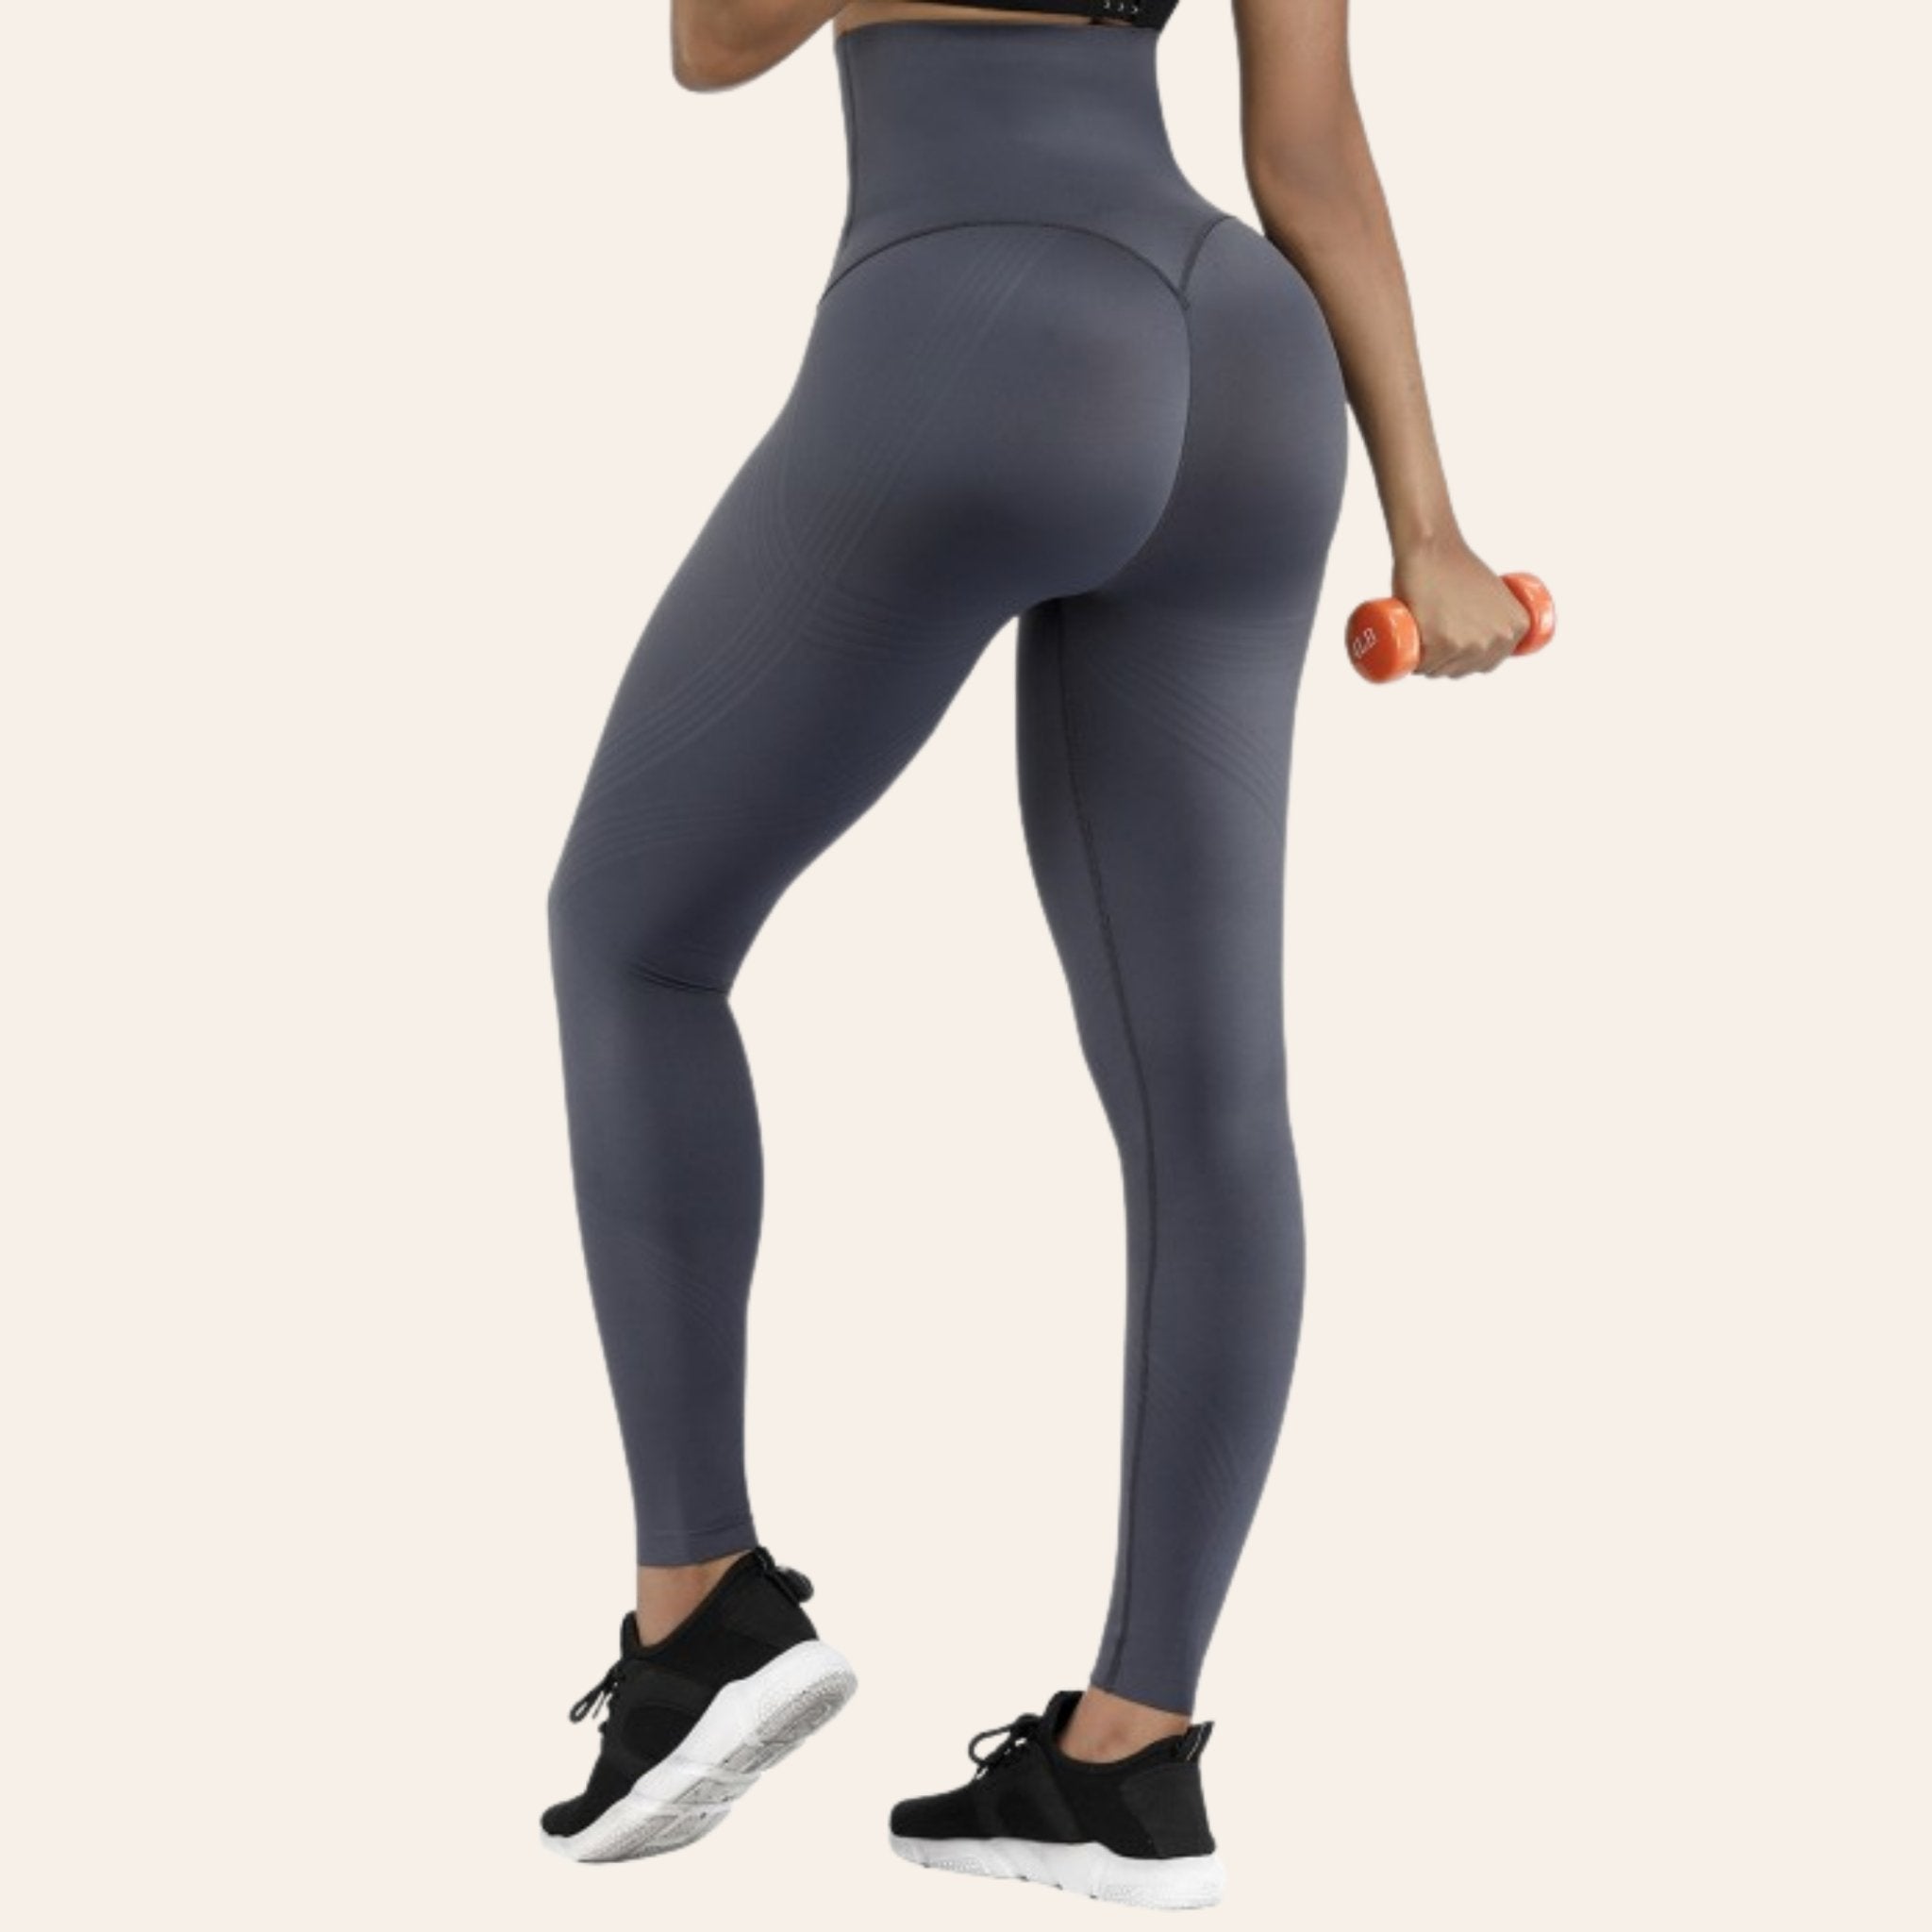 EXTRA HIGH WAISTED FIRM COMPRESSION LEGGING